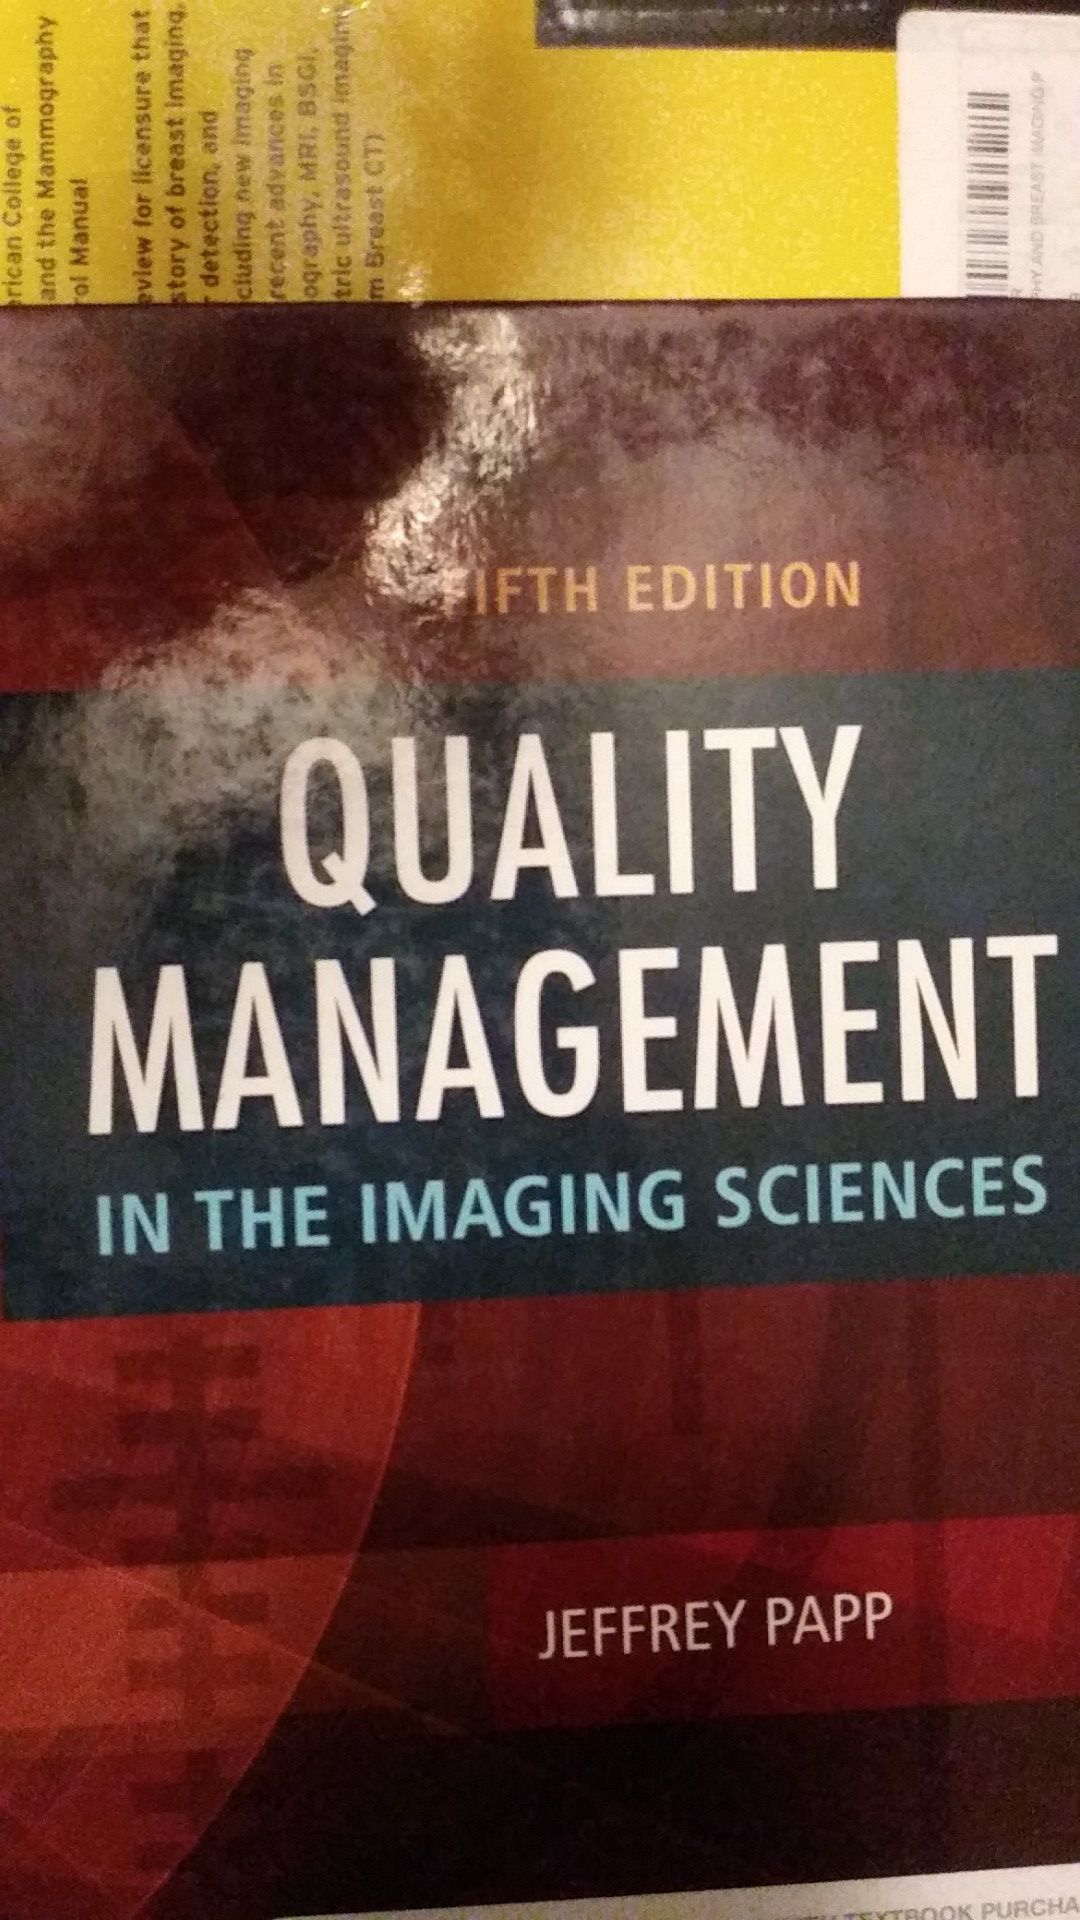 Quality Management in the Imaging Sciences, 5th ed.